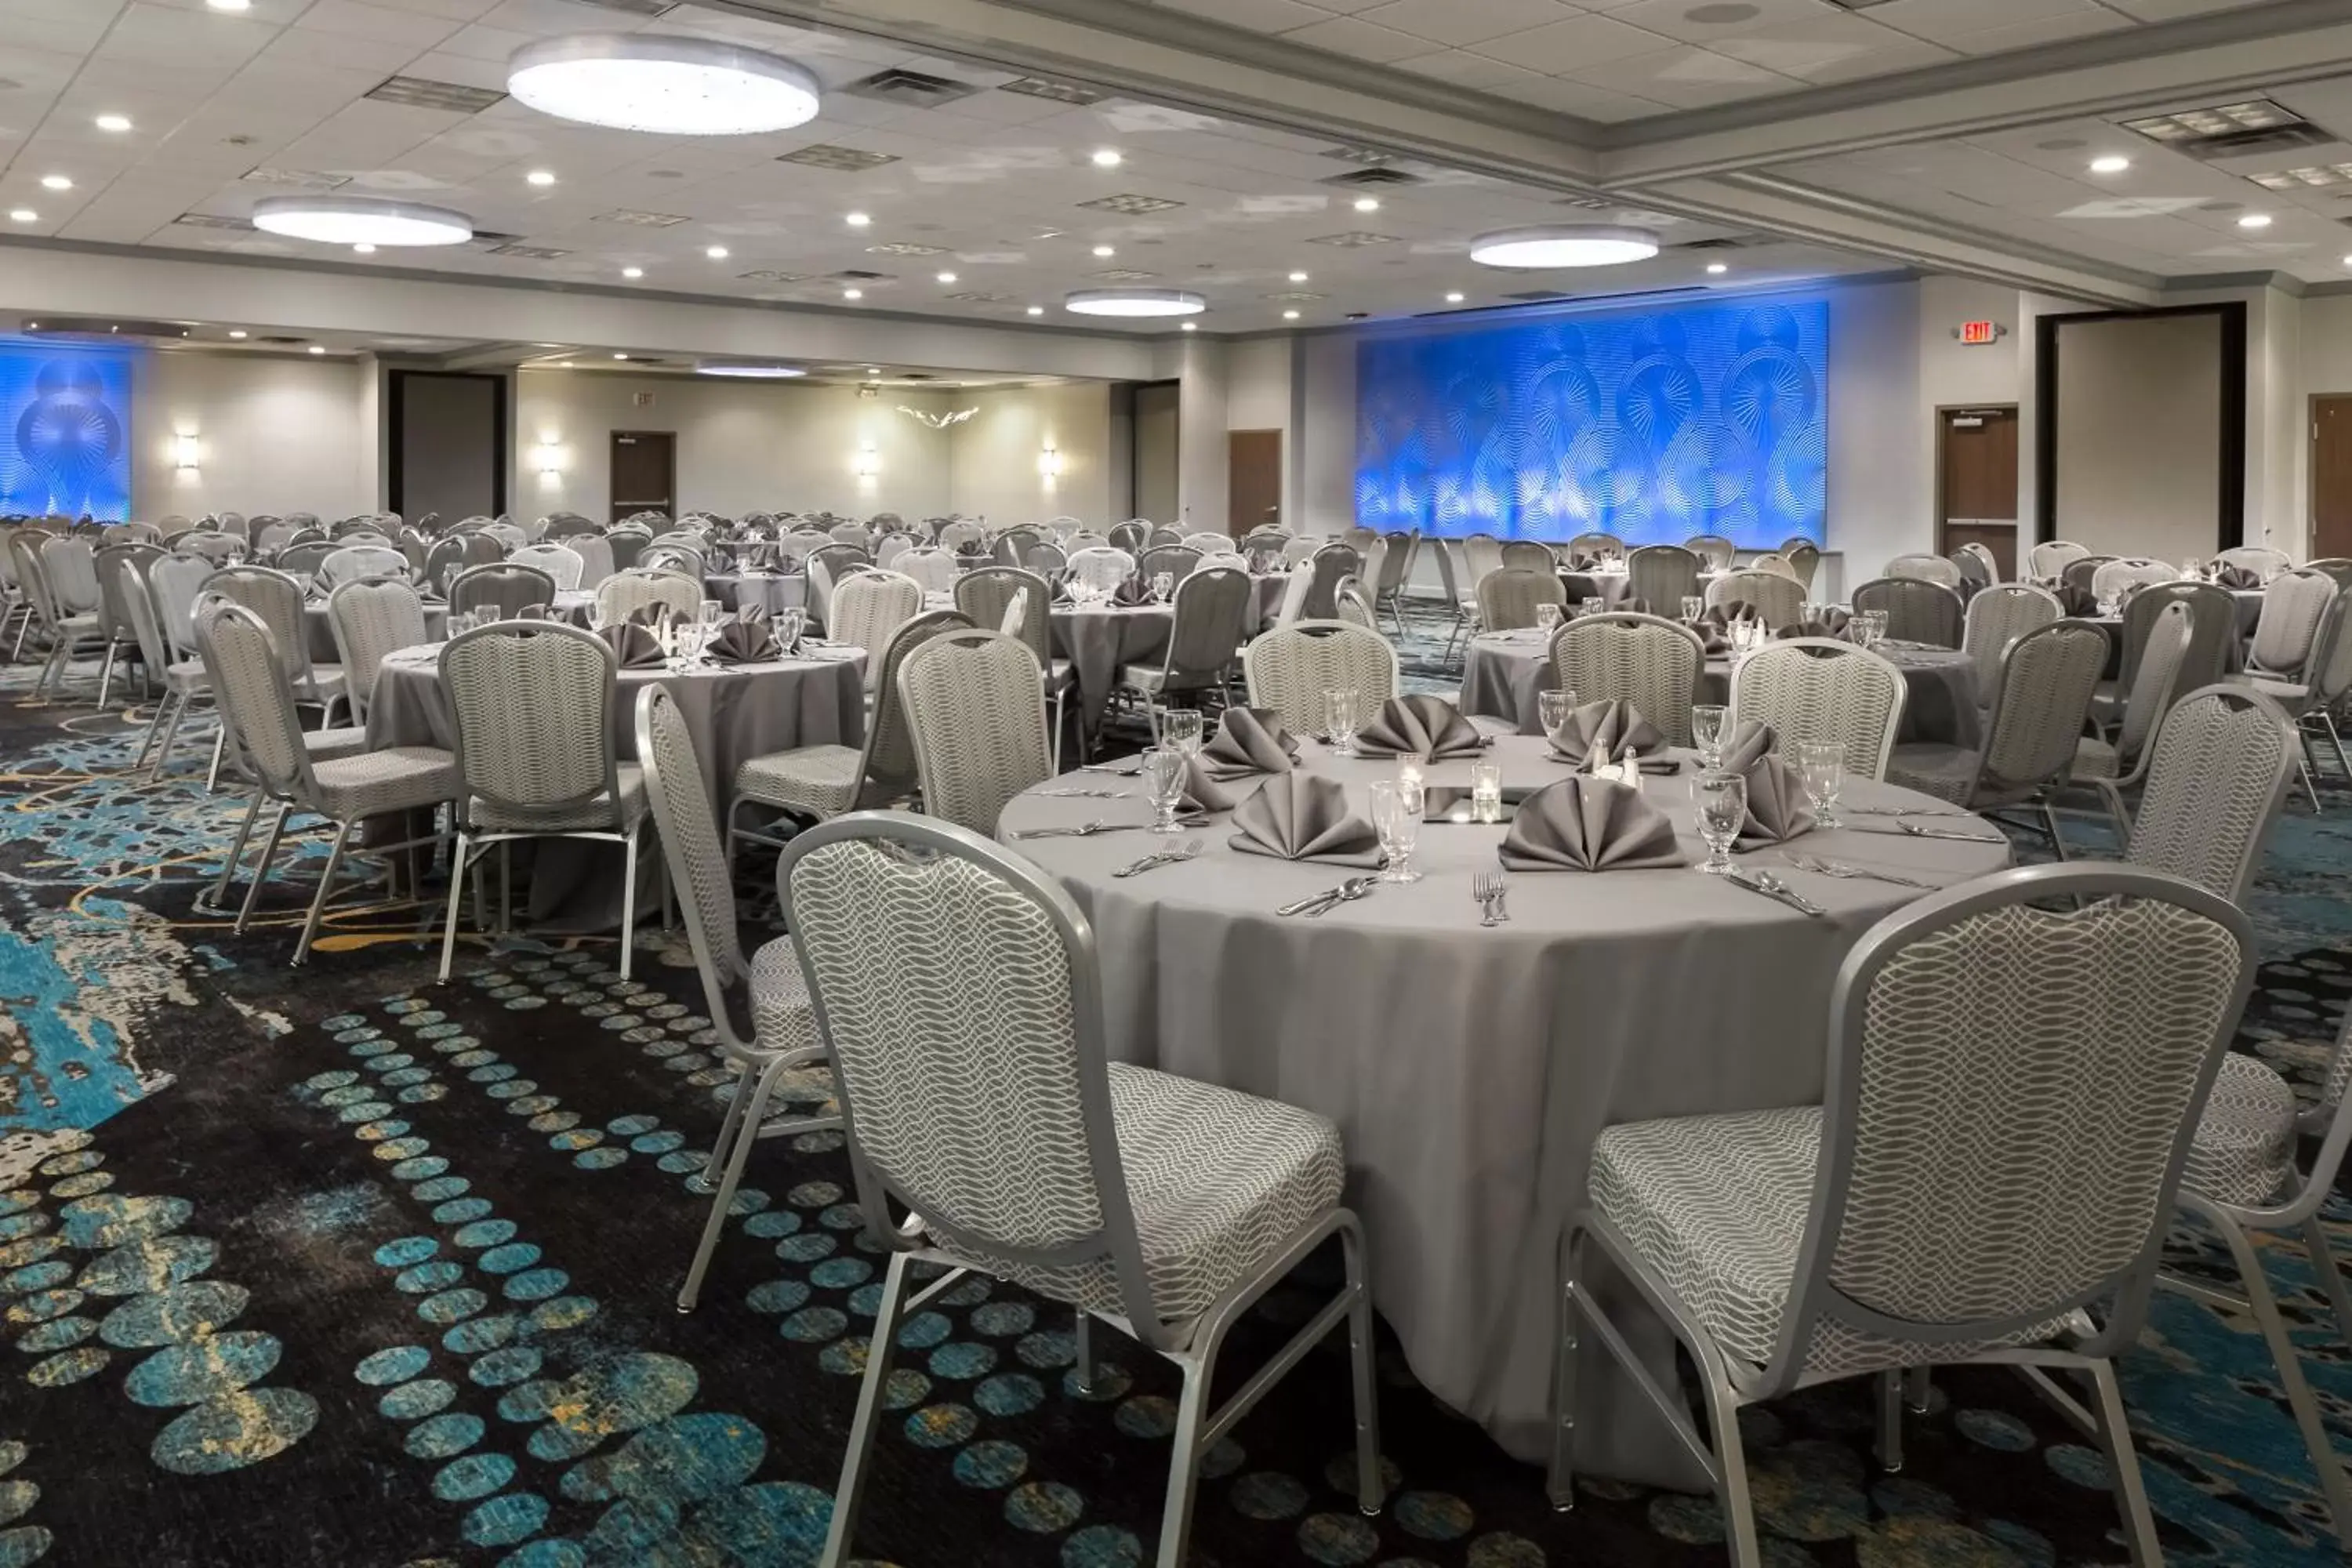 Banquet/Function facilities, Banquet Facilities in Radisson Hotel & Conference Center Coralville - Iowa City